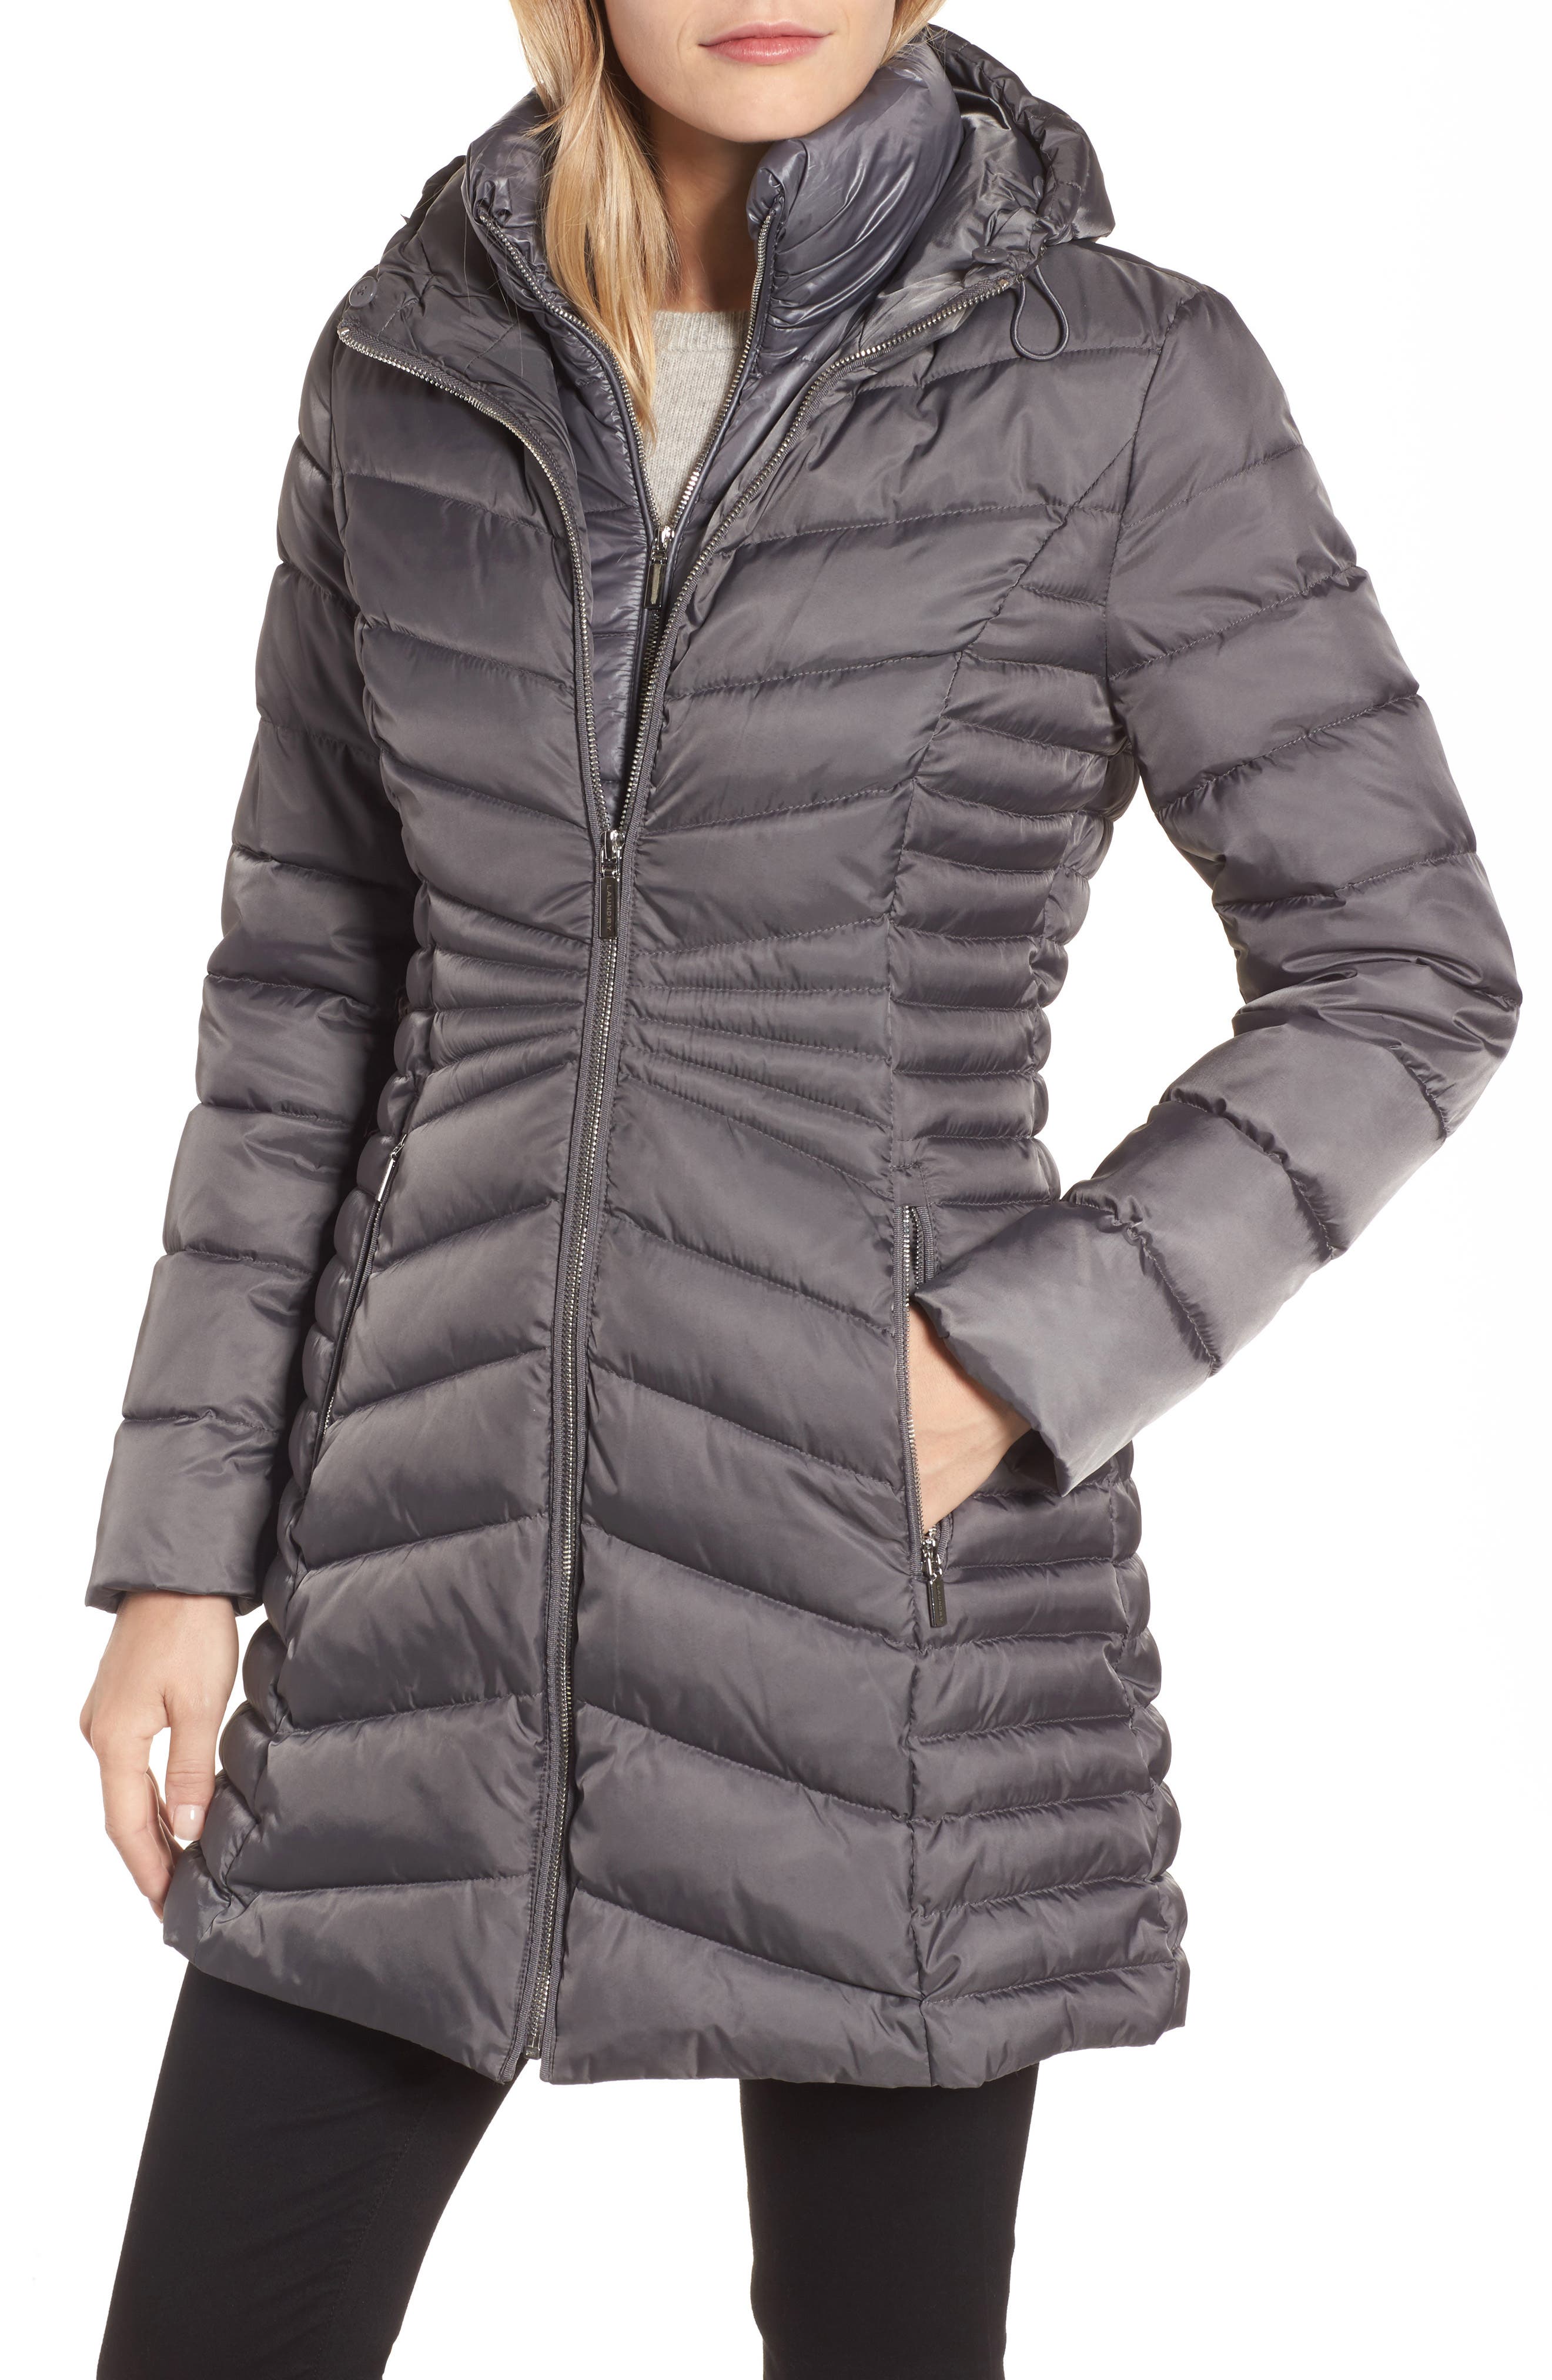 Laundry By Shelli Segal | Faux Fur Trim Hooded Puffer Coat | Nordstrom Rack